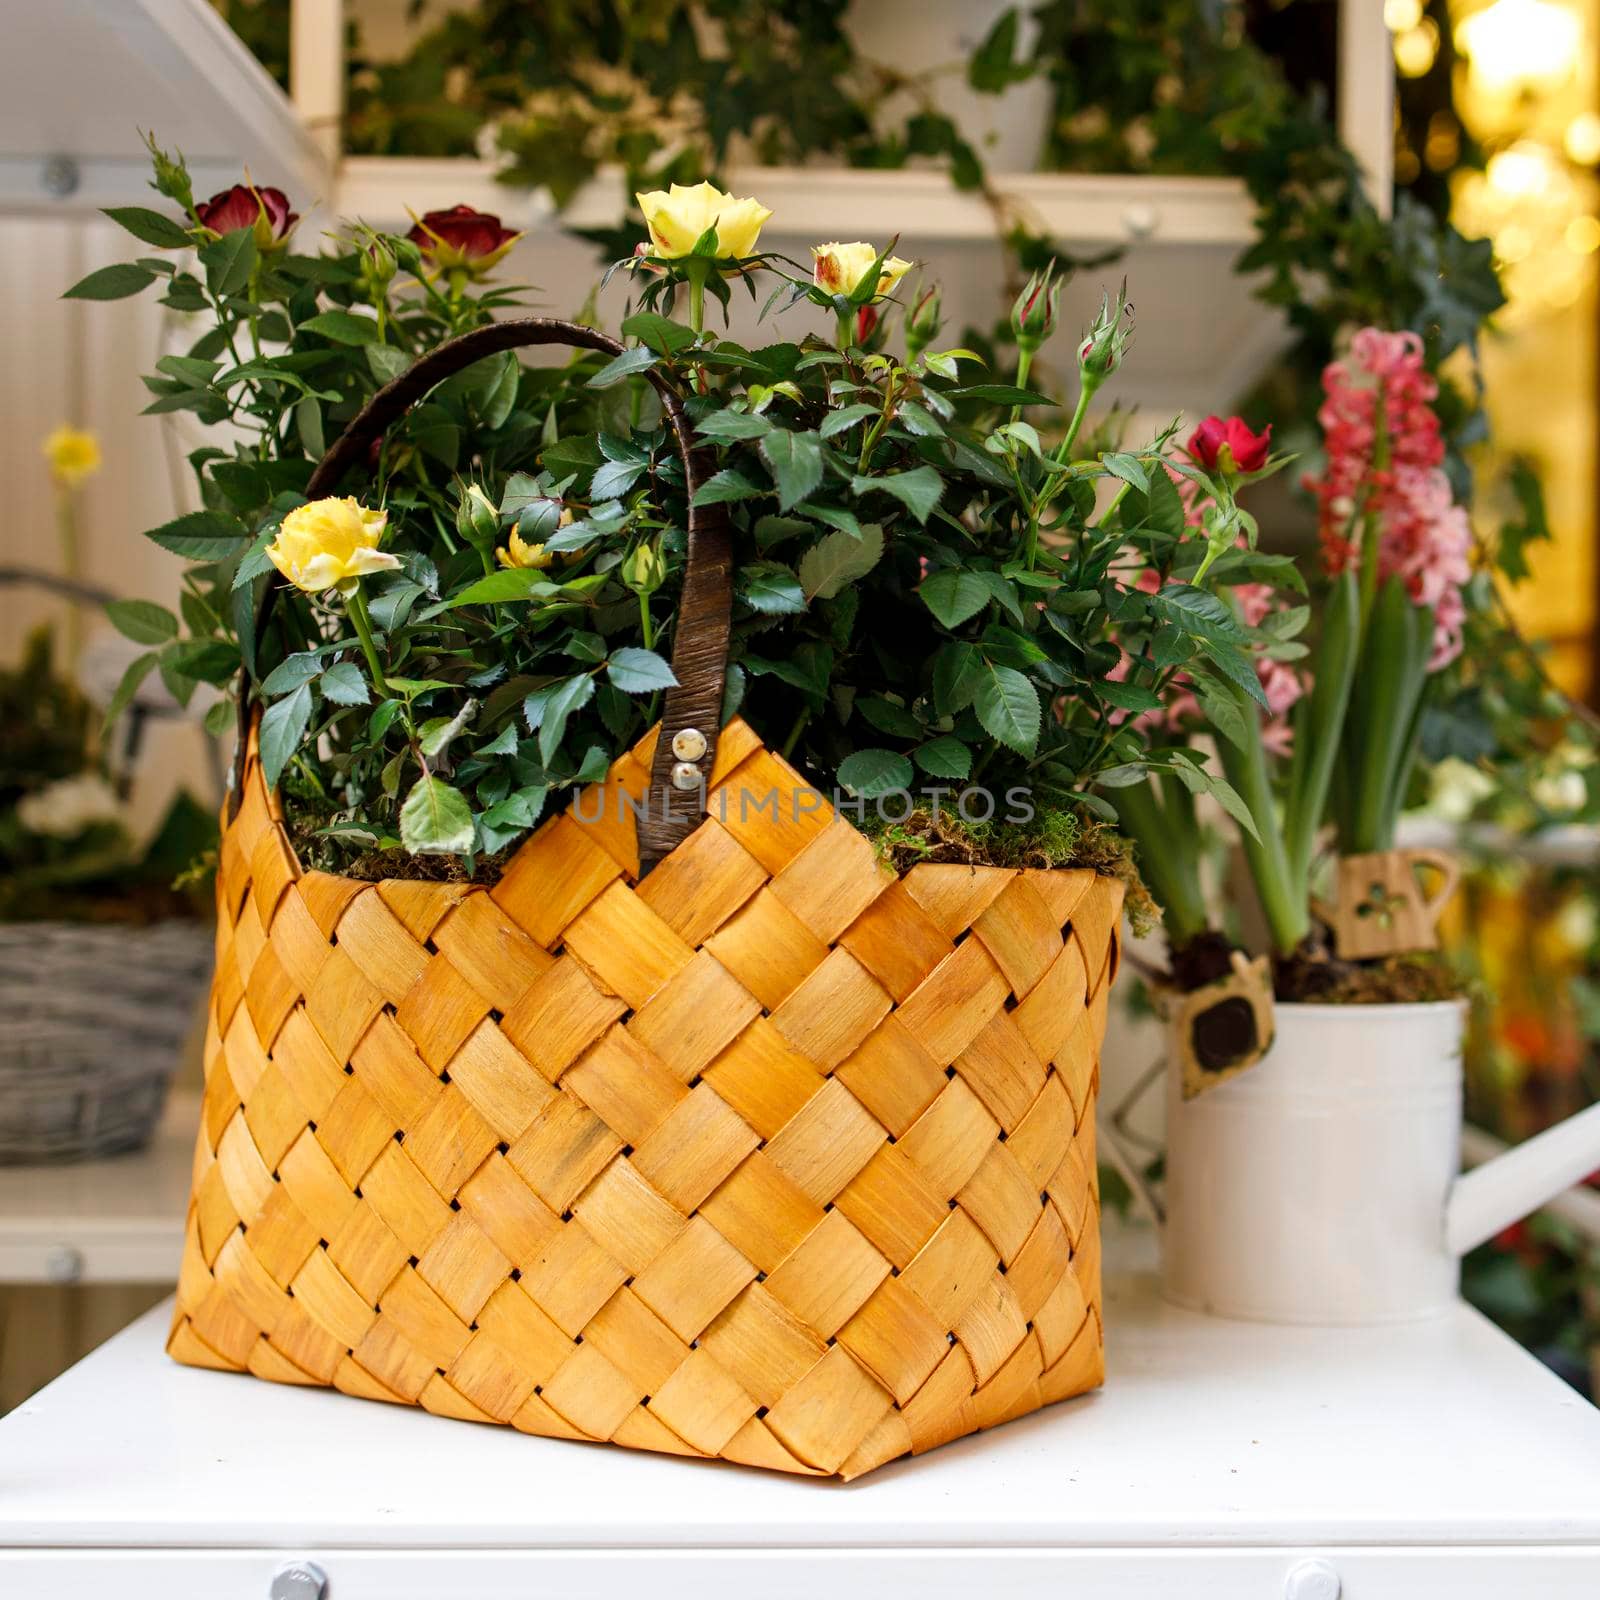 pink and yellow rose bushes in a woven birch bark bag for sale in a flower shop